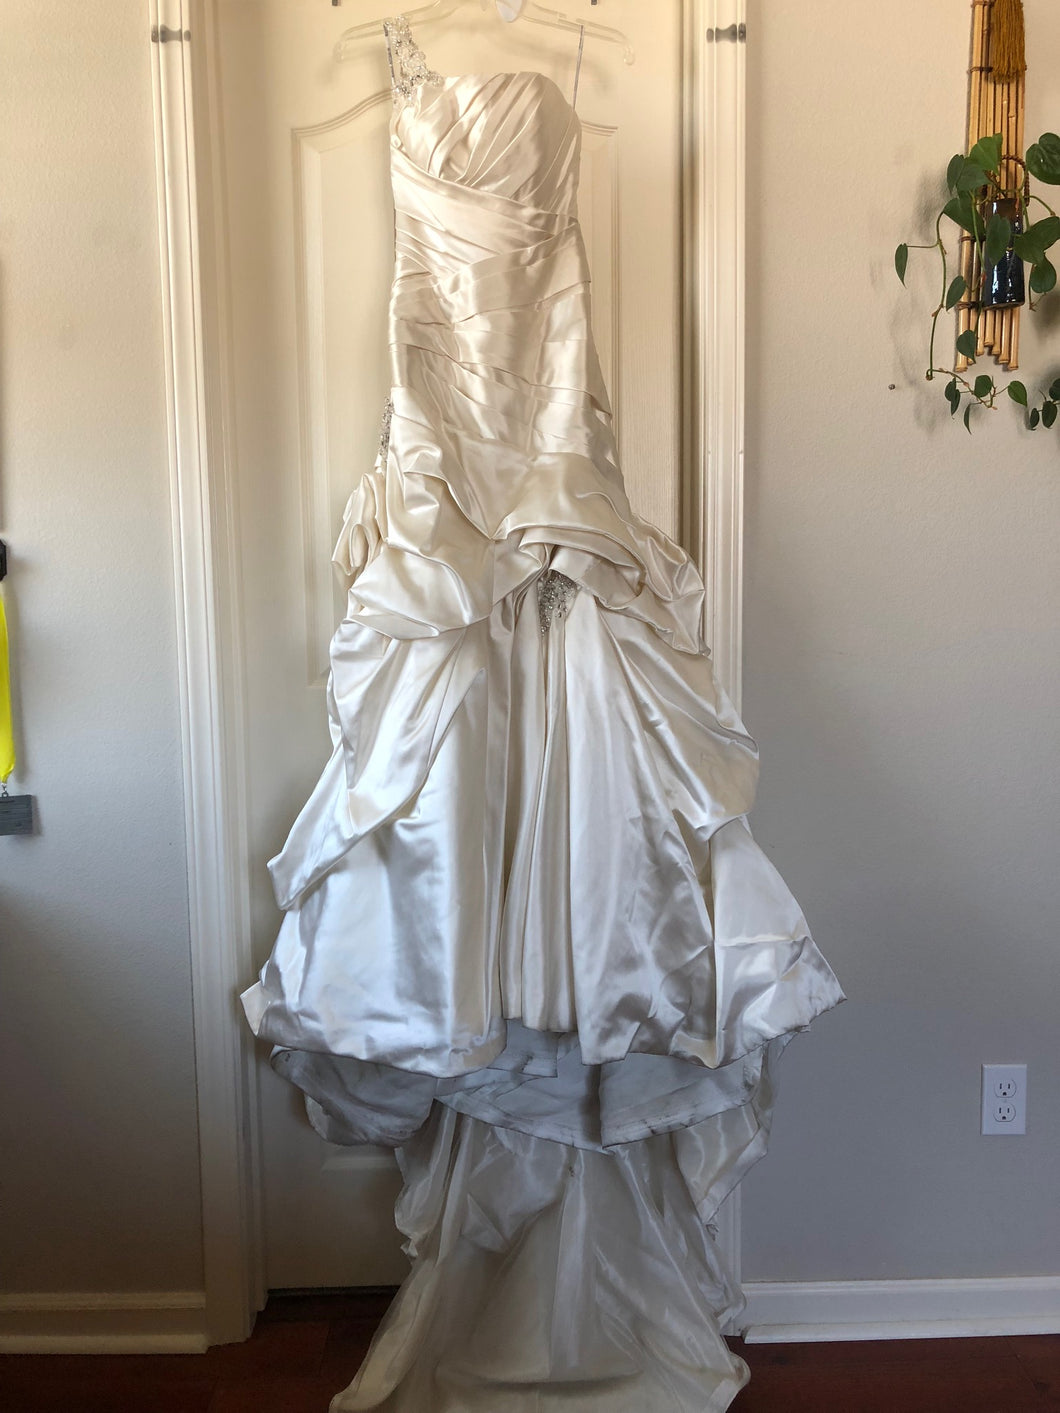 Maggie Sottero 'Fiorella' size 2 new wedding dress front view on hanger